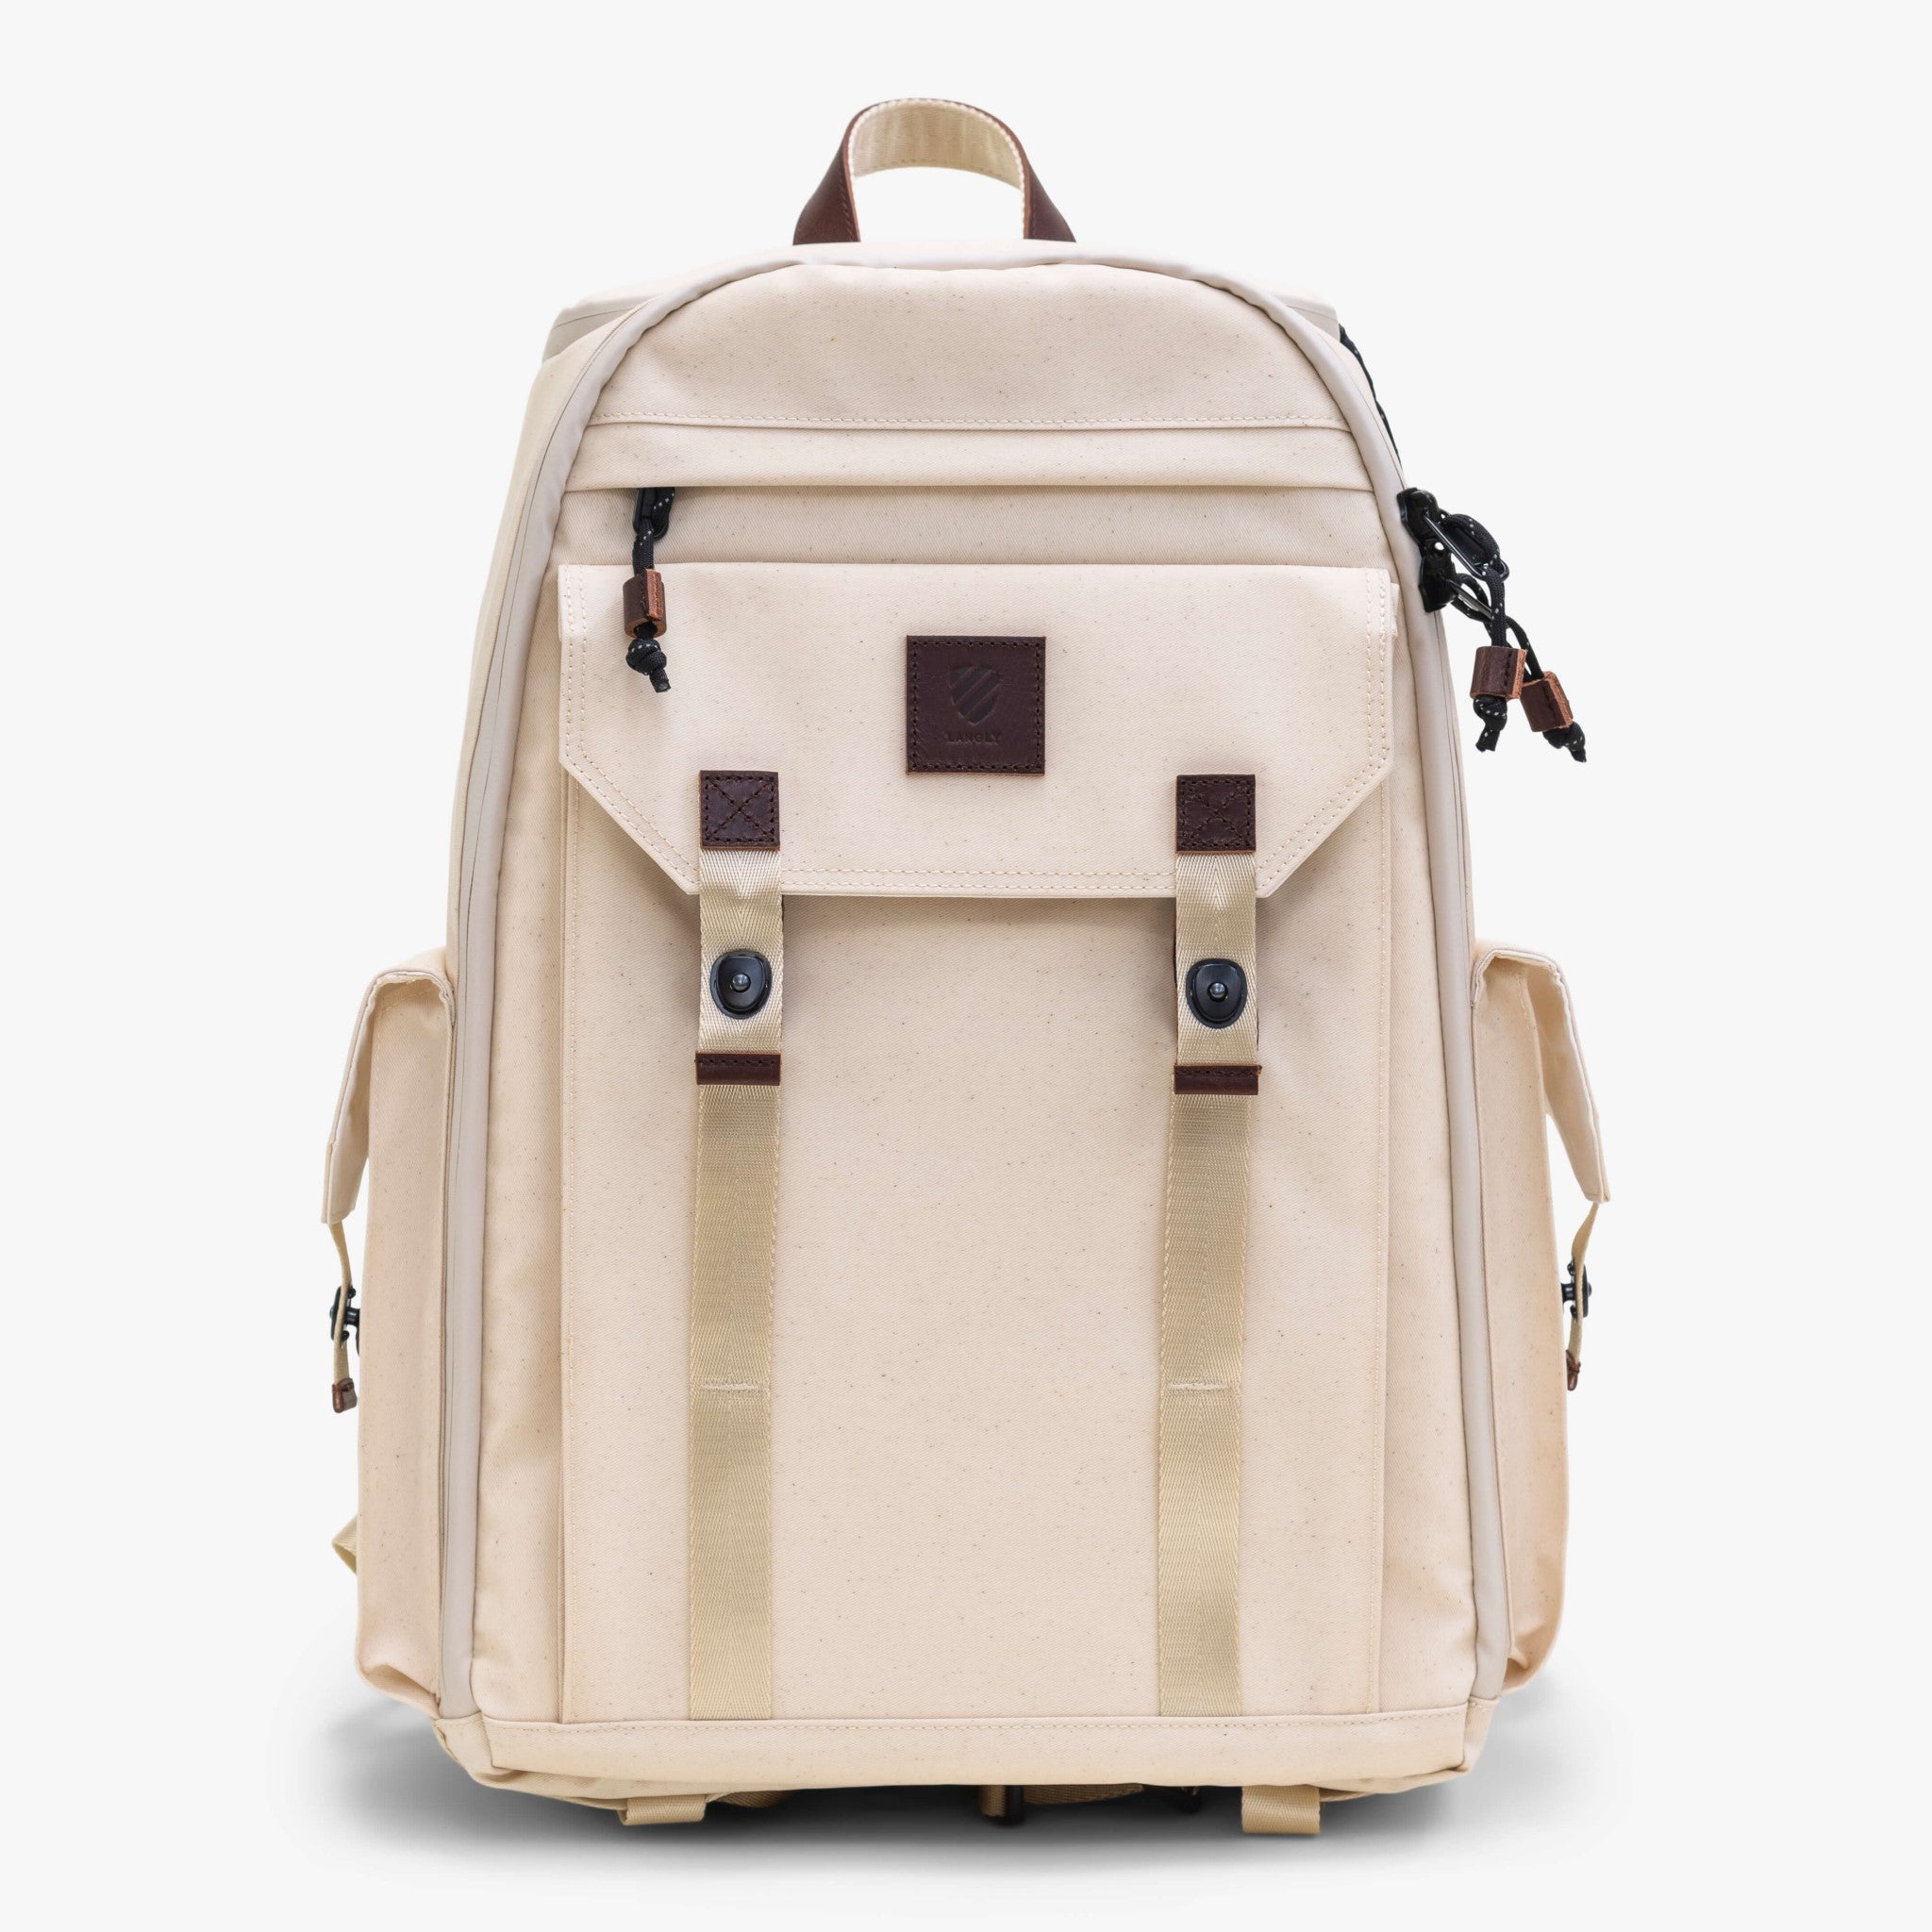 Langly Sierra Camera Backpack - Classic Blue